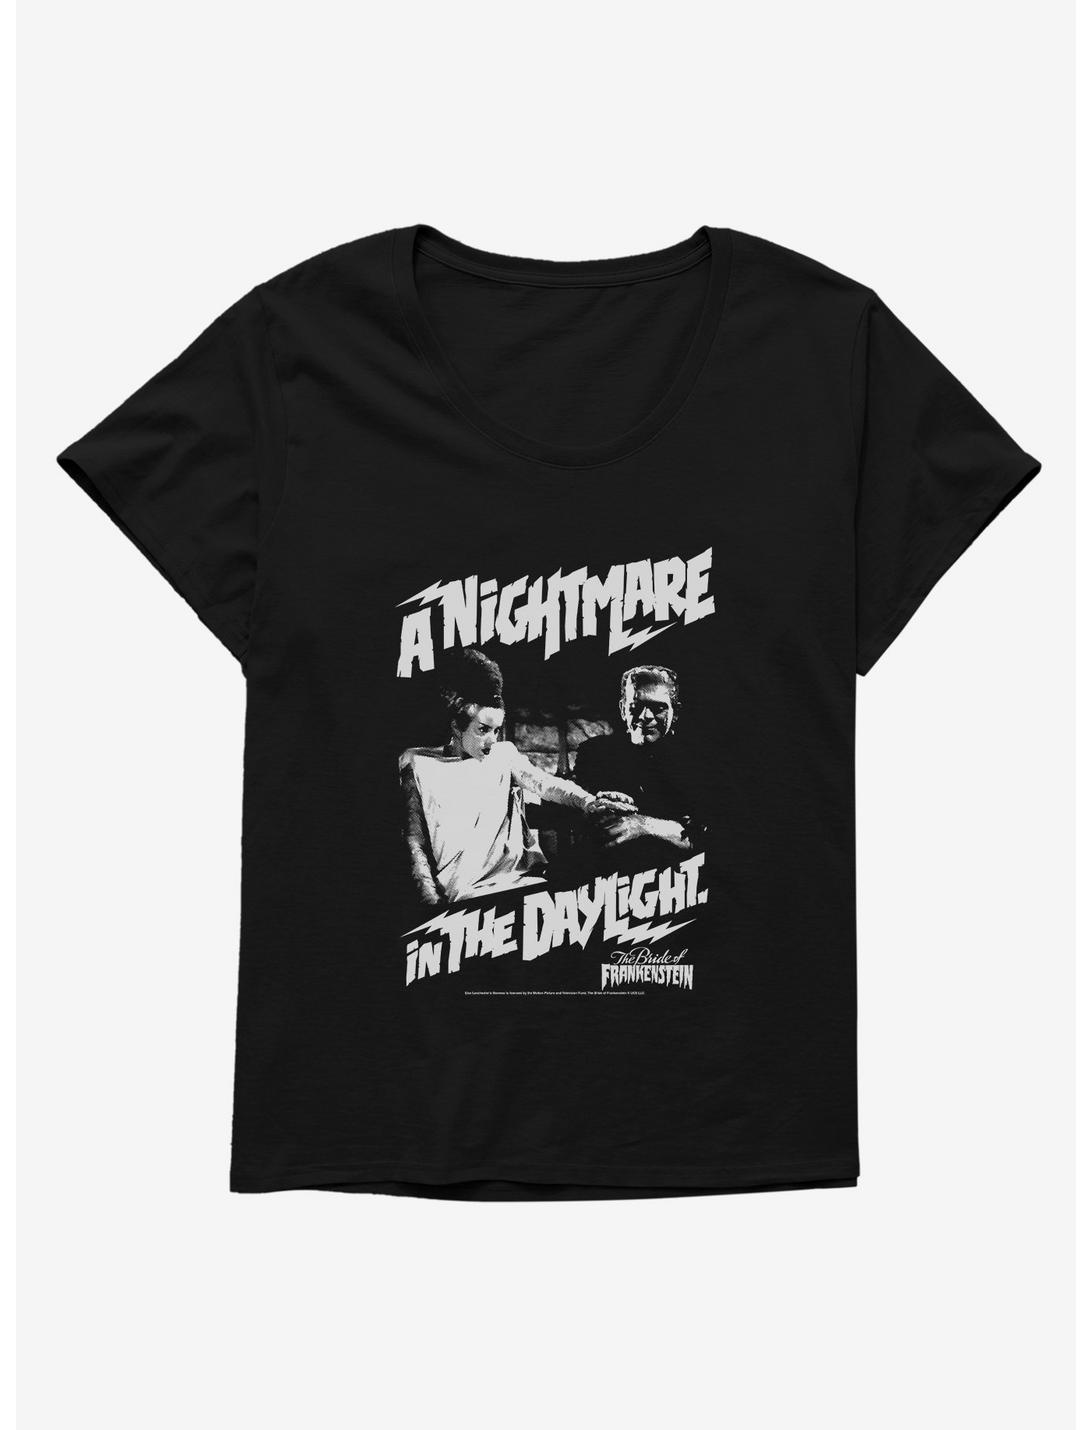 The Bride Of Frankenstein A Nightmare In The Daylight Womens T-Shirt Plus Size, BLACK, hi-res